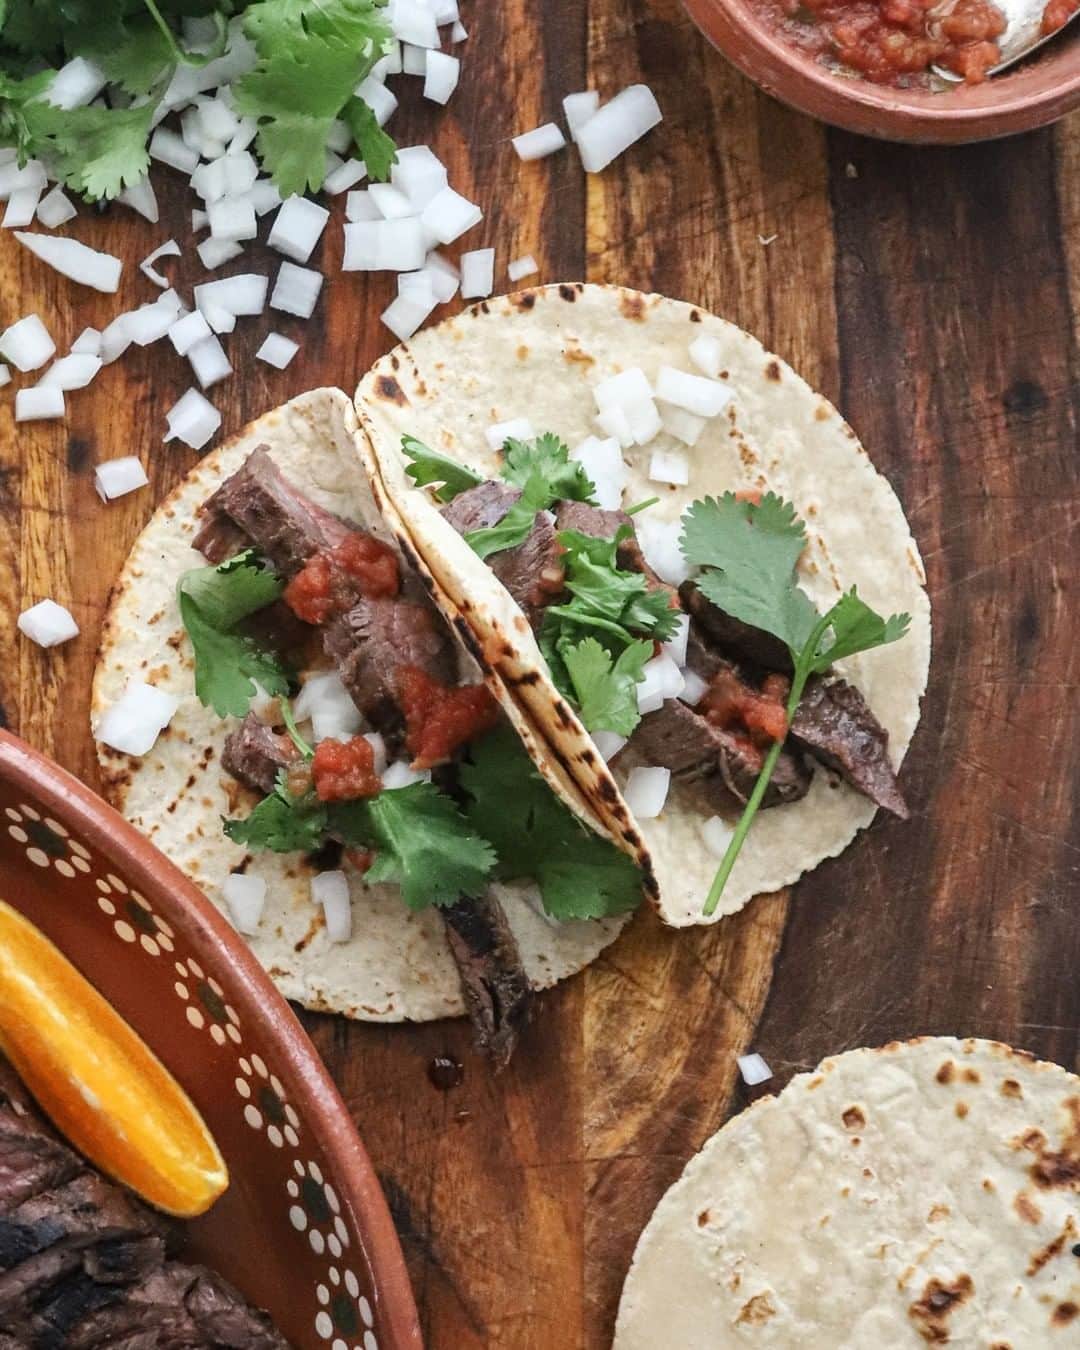 Food Republicさんのインスタグラム写真 - (Food RepublicInstagram)「Citrusy Carne Asada Recipe  This recipe for carne asada celebrates the art of grilling flank steak to perfection, creating a delicious dish that embodies the essence of Mexican culture.  Recipe developed in collaboration with @taylorelysemurray.  Prep Time: 12 hours 5 minutes  Cook Time: 15 minutes  Servings: 2  Ingredients  For the carne asada:  -2 tablespoons white vinegar -1 tablespoon vegetable oil -1 orange, juiced -2 limes, juiced -½ white onion, thinly sliced -3 cloves garlic, thinly sliced -1 jalapeño, halved and seeded -¾ pounds flank steak -Salt and pepper  For the tacos:  -Tortillas -1 bunch cilantro, chopped -1 onion, chopped -Salsa, for serving  Directions  1. Combine the vinegar, oil, citrus juices, onions, garlic, and jalapeño in a bowl. 2. Place the flank steak in a ziplock bag and add the marinade. Seal tightly. Refrigerate overnight (or up to 24 hours). 3. Preheat a charcoal or gas grill to medium heat. 4. Remove the steak from the ziplock bag and discard the marinade. Season the steak generously with salt and pepper on both sides. 5. Place the steak on the preheated grill and cook for about 4-5 minutes per side for medium-rare, or adjust the cooking time to your desired level of doneness. 6. While grilling the steak, lightly grill the tortillas by placing them directly on the grill for a few seconds on each side until slightly charred. 7. Once the steak is cooked to your liking, remove it from the grill and let it rest. Slice the grilled steak against the grain into thin strips. 8. To assemble the carne asada tacos, place a few slices of grilled steak onto each warmed tortilla. Top with chopped cilantro, chopped onions, and a spoonful of salsa. 9. Serve the tacos immediately and enjoy your delicious homemade carne asada.」8月15日 22時08分 - foodrepublic